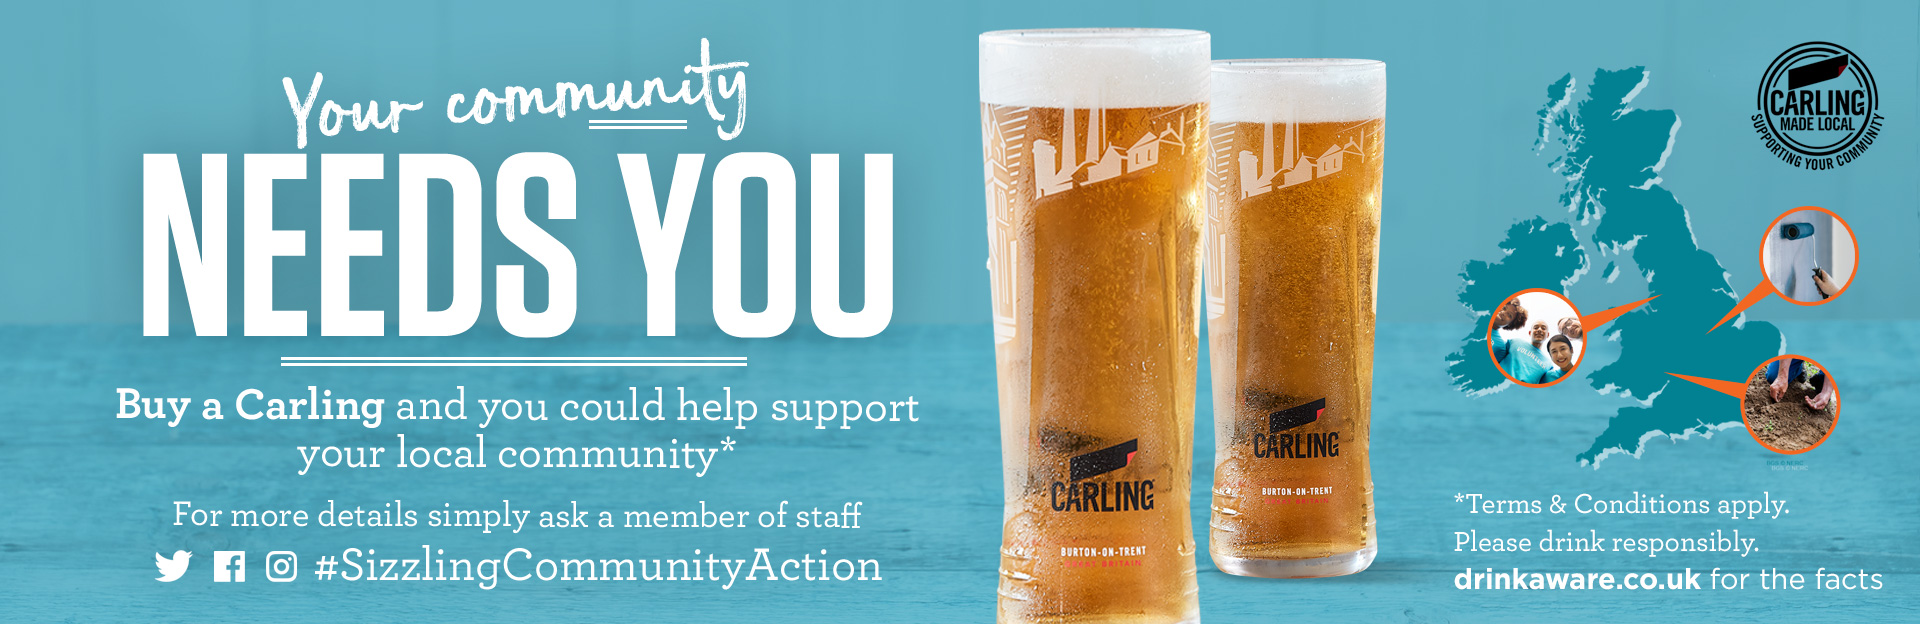 Sizzling Carling Community needs you!